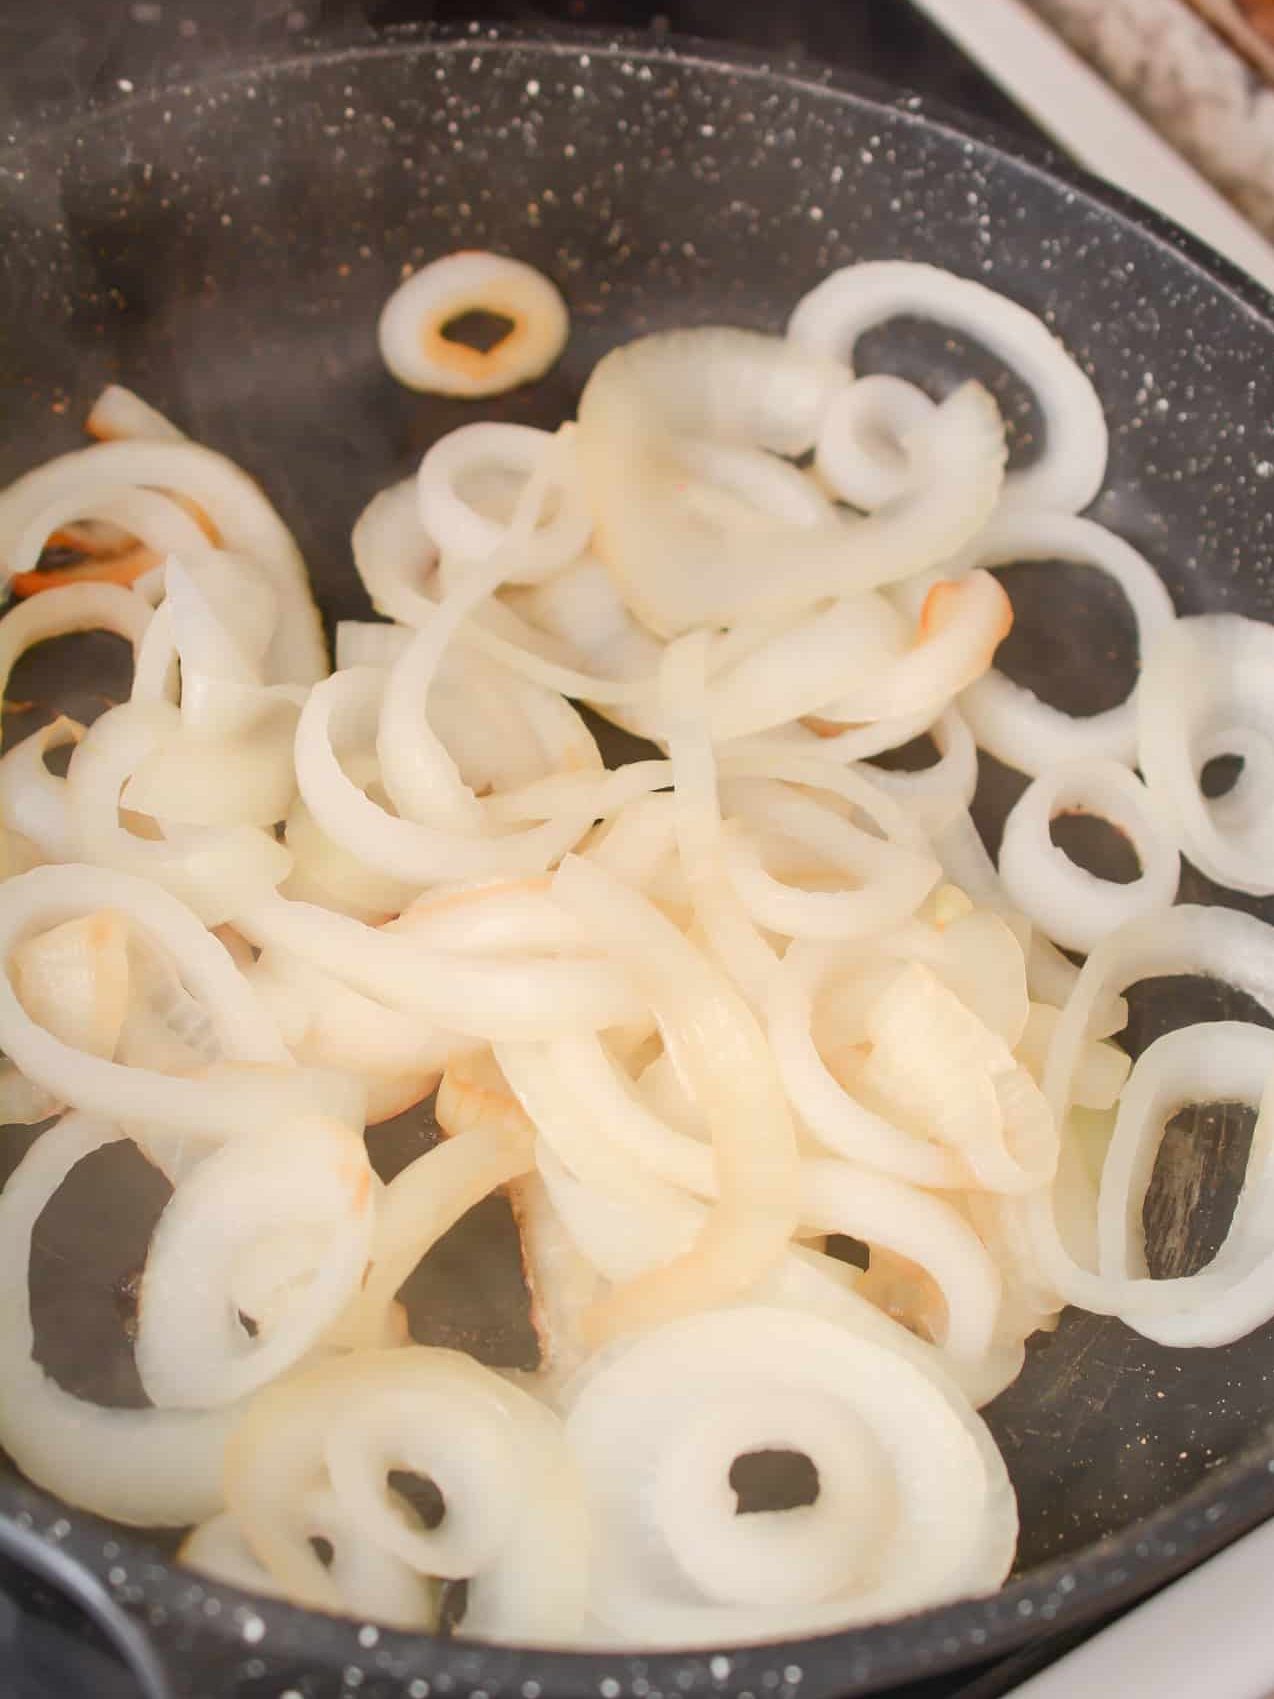 Add the onions to a skillet over medium heat on the stove, and add just enough salt to have them start releasing moisture from them. Saute until tender and caramelized then set aside.